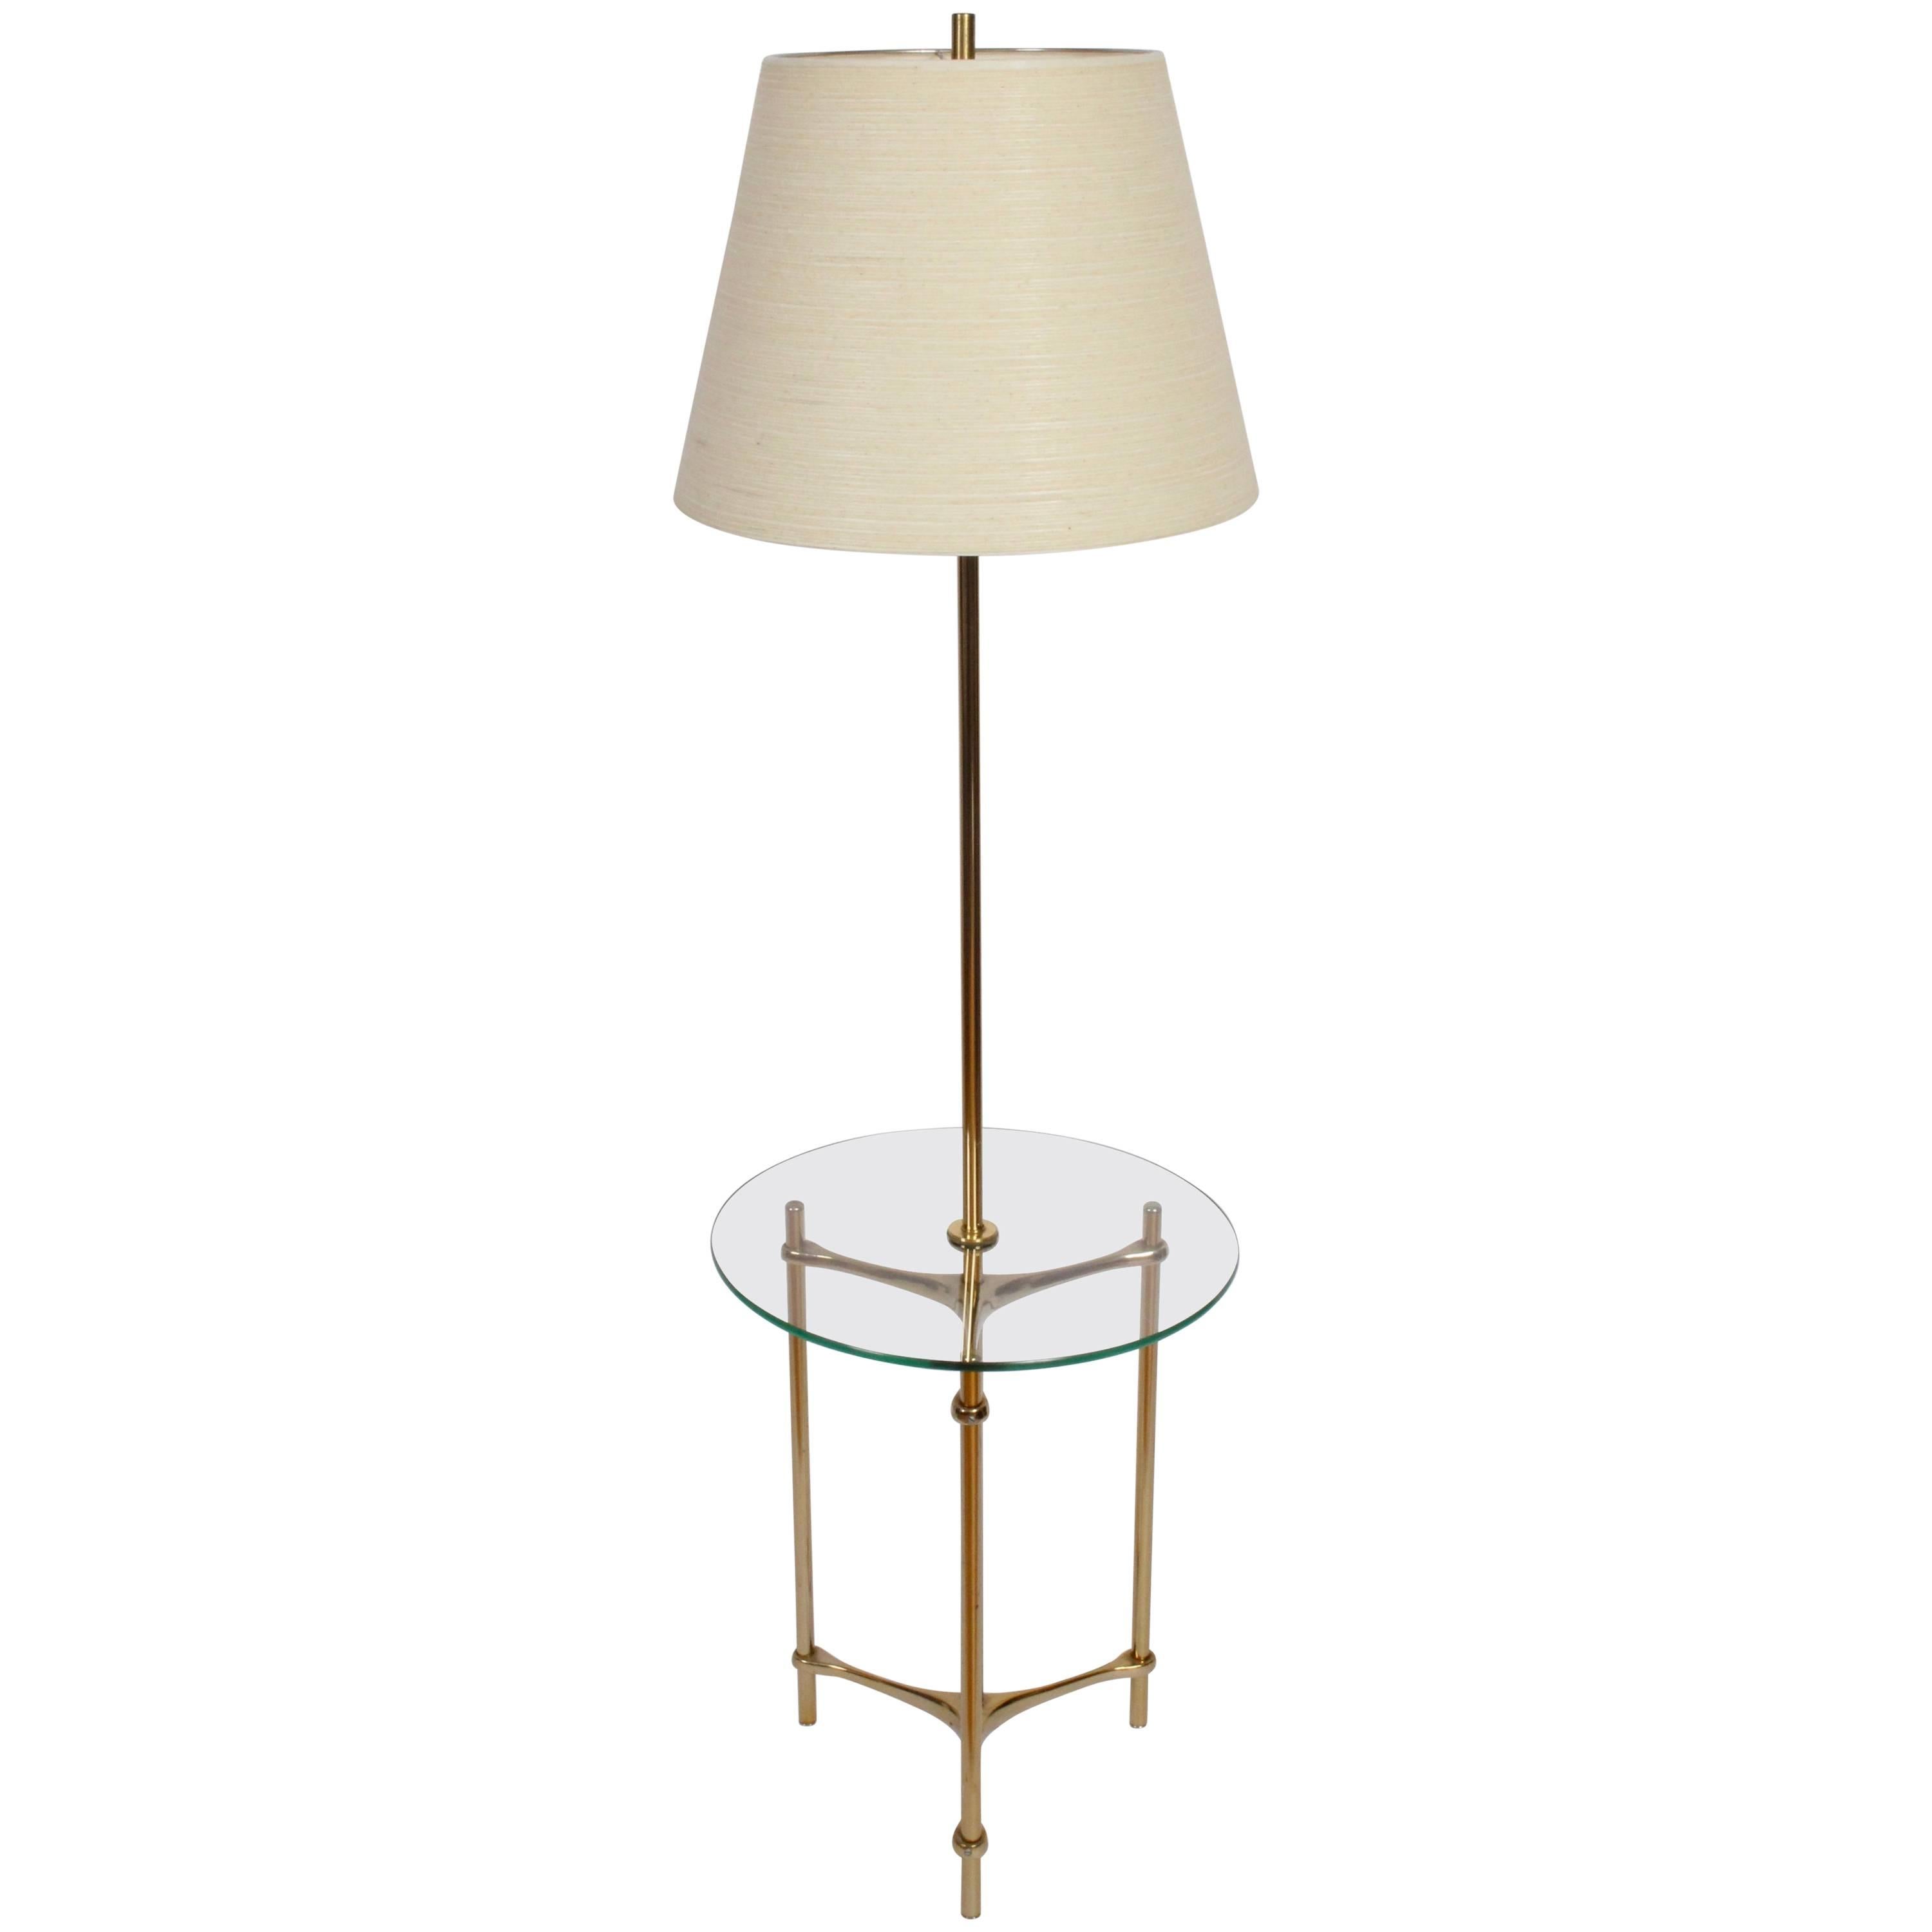 1970s Laurel Lamp Company Brass and Side Table Floor Lamp